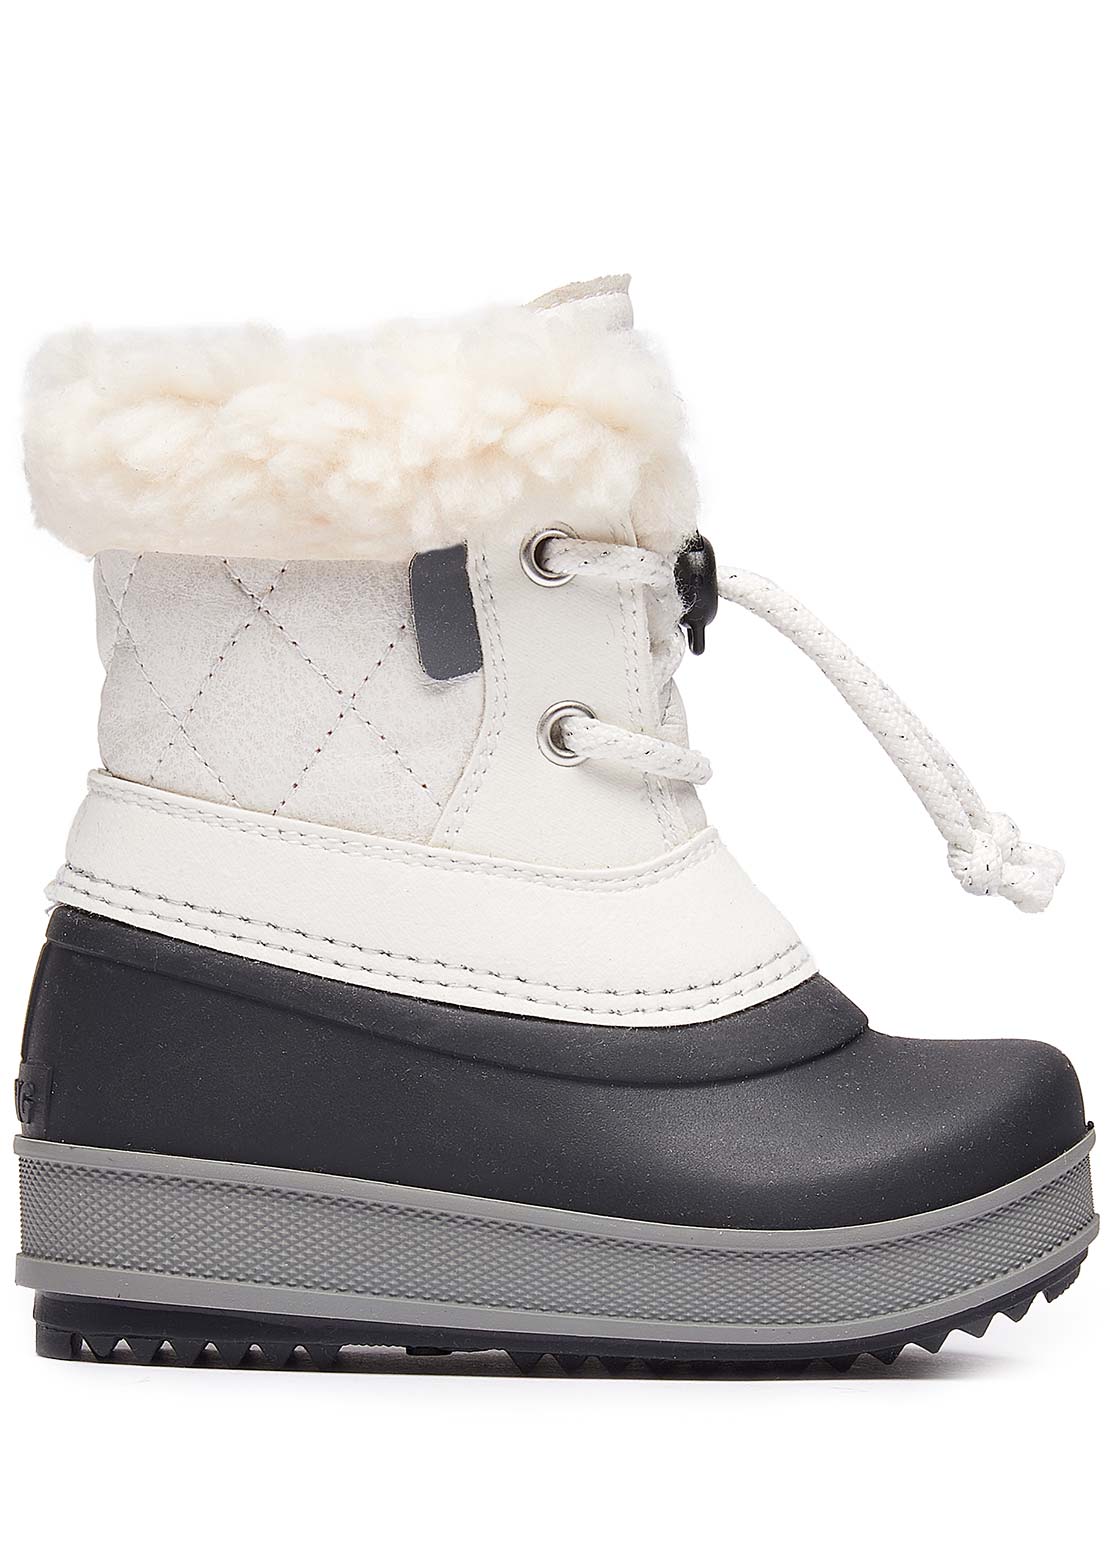 Olang Toddler Ape Boots Bianco